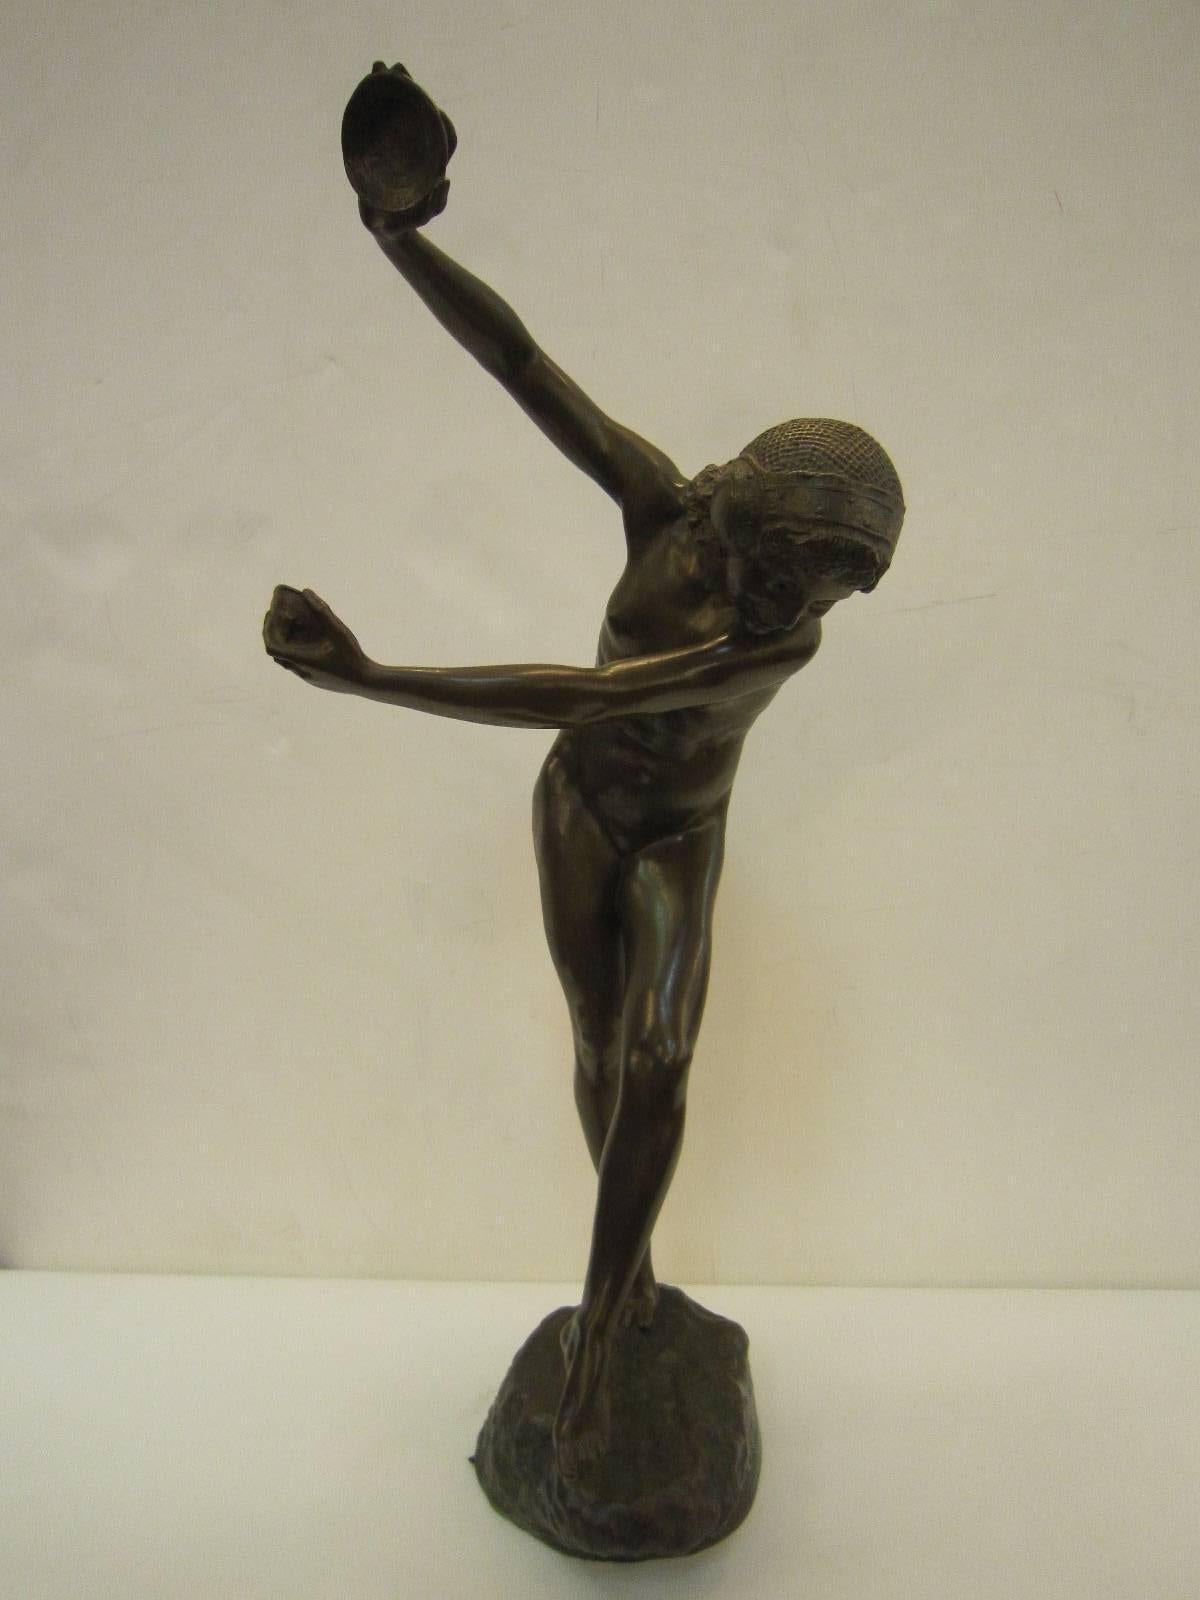 A Laurence Dupuy large bronze sculpture representing a young woman, naked , wearing a stylized headdress and dancing with cymbals.
signed on the base: L. Dupuy and Susse Fres Edts, along with circular foundry stamp.
This is a tall Art Deco statue